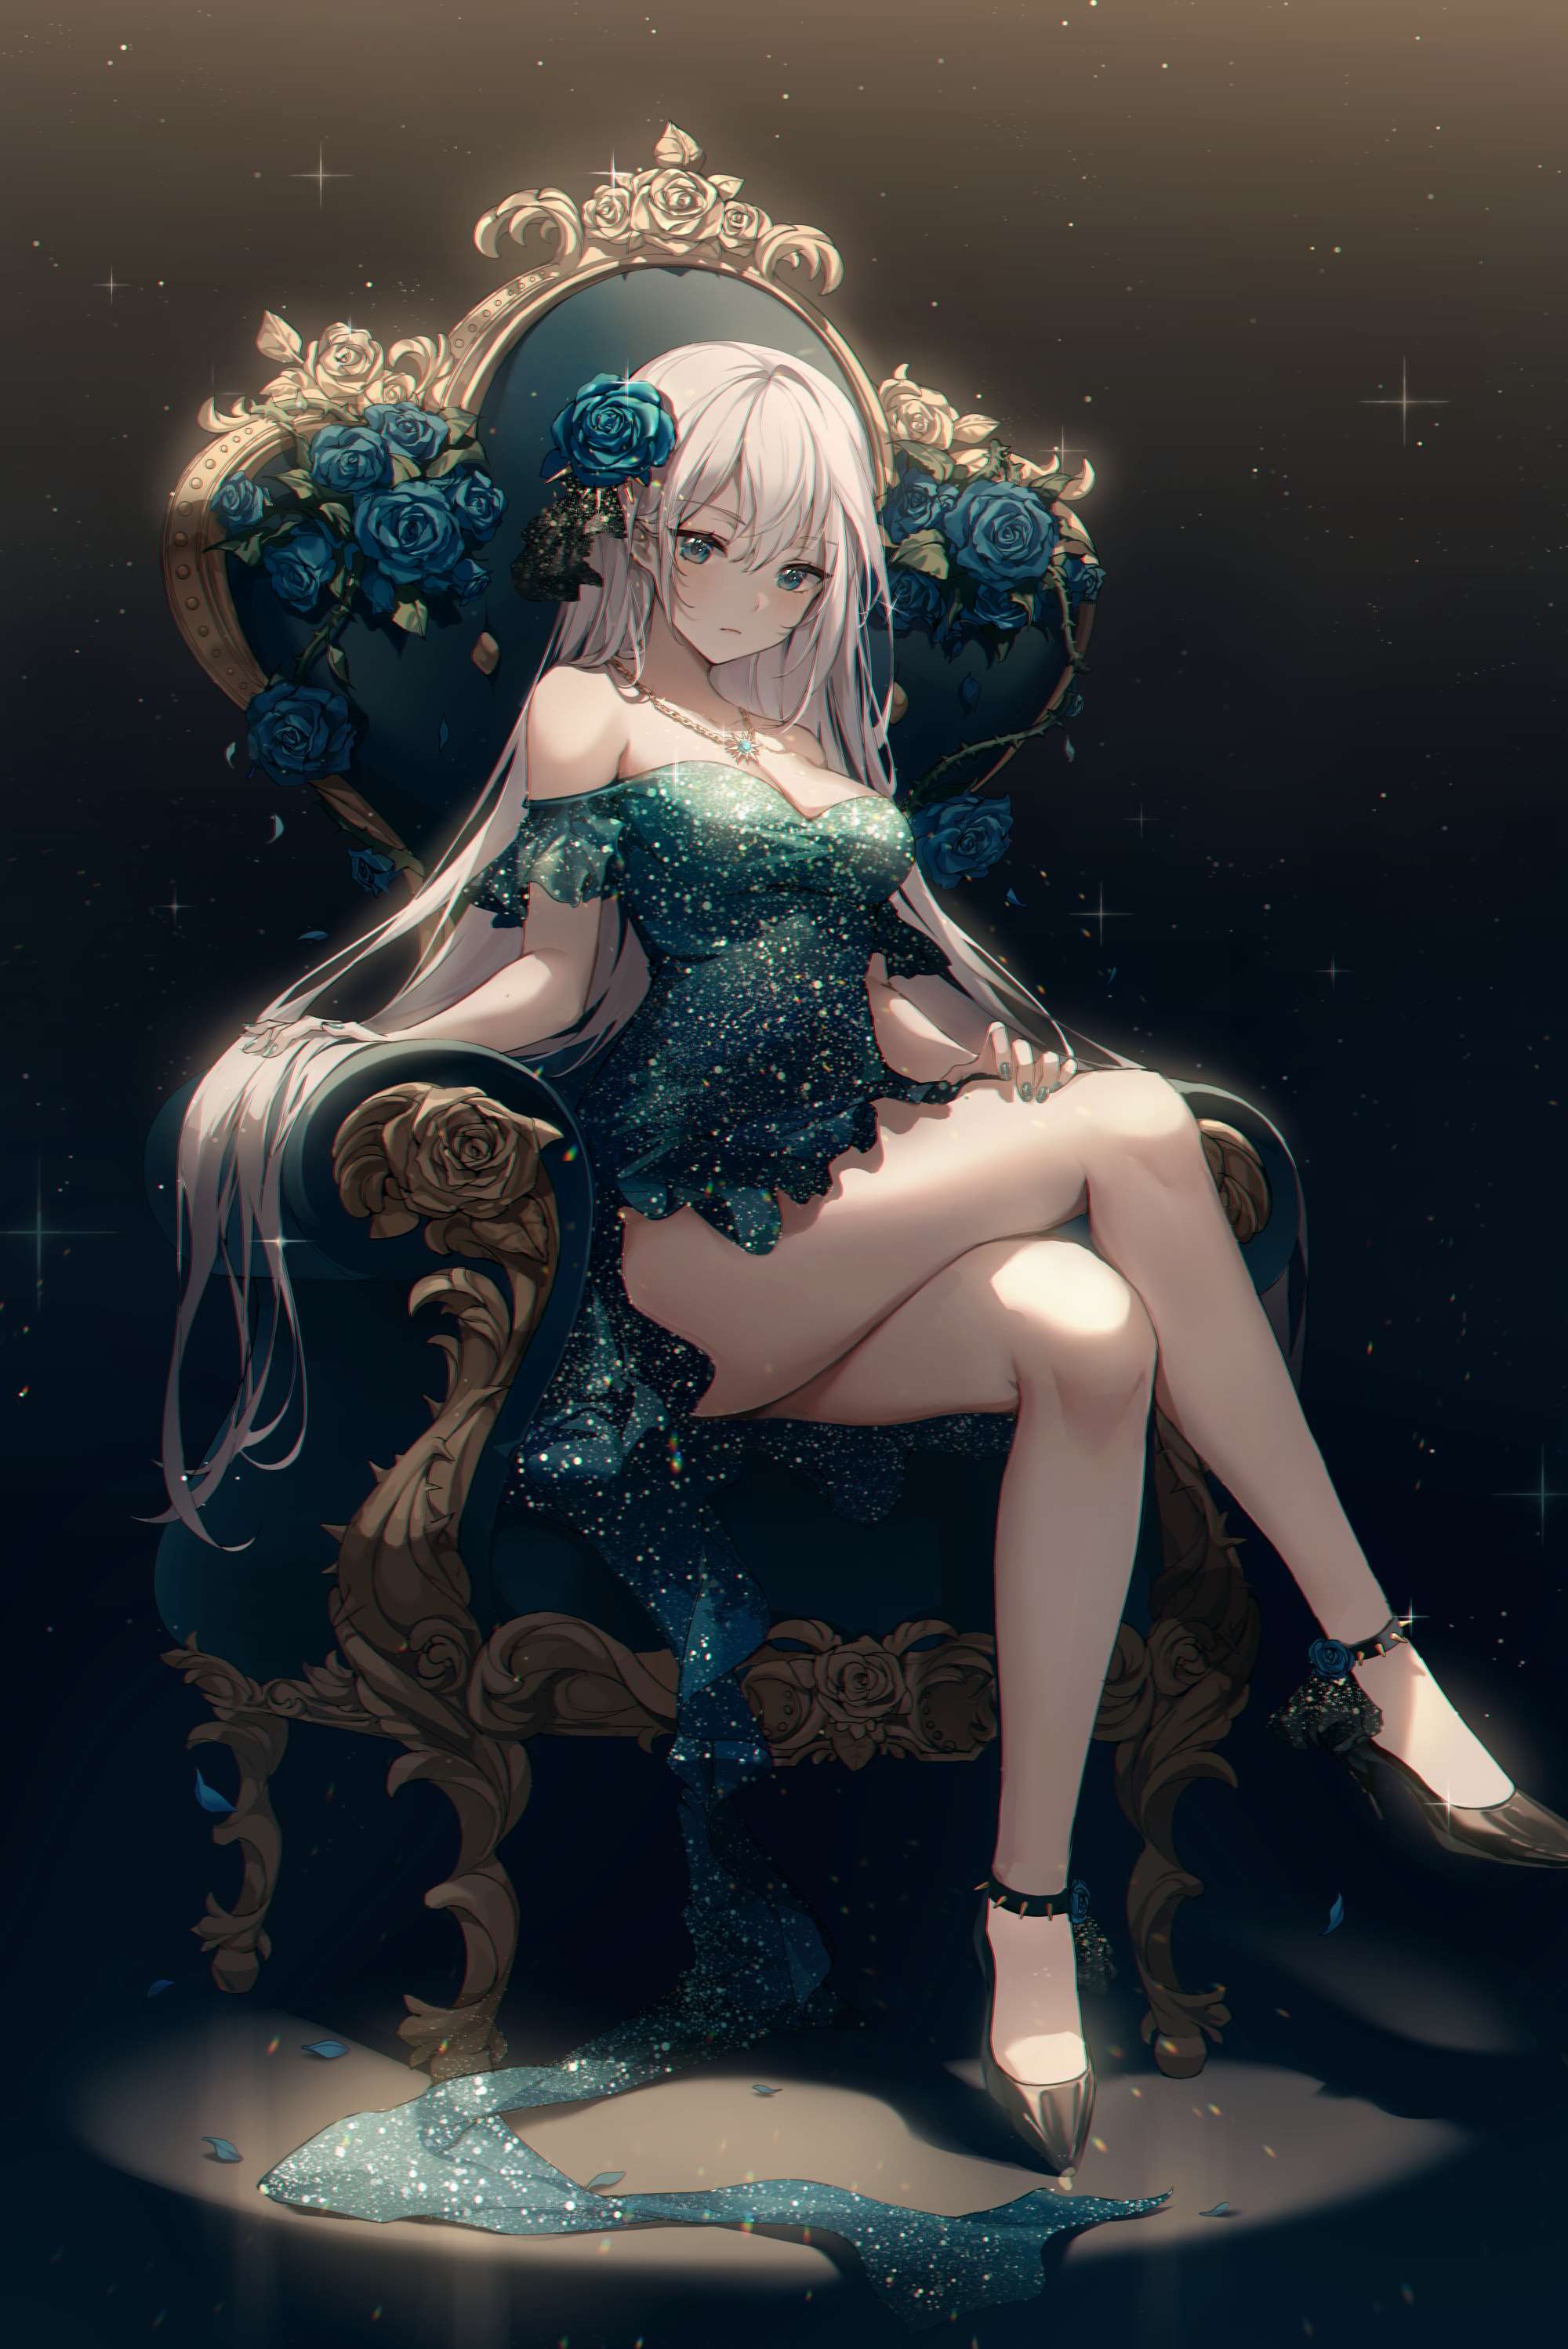 ♈rose, plants, chair, aqua eyes, necklace, sad, Dignified, gemstone necklace | 2000×2996 -【唯美小筑】